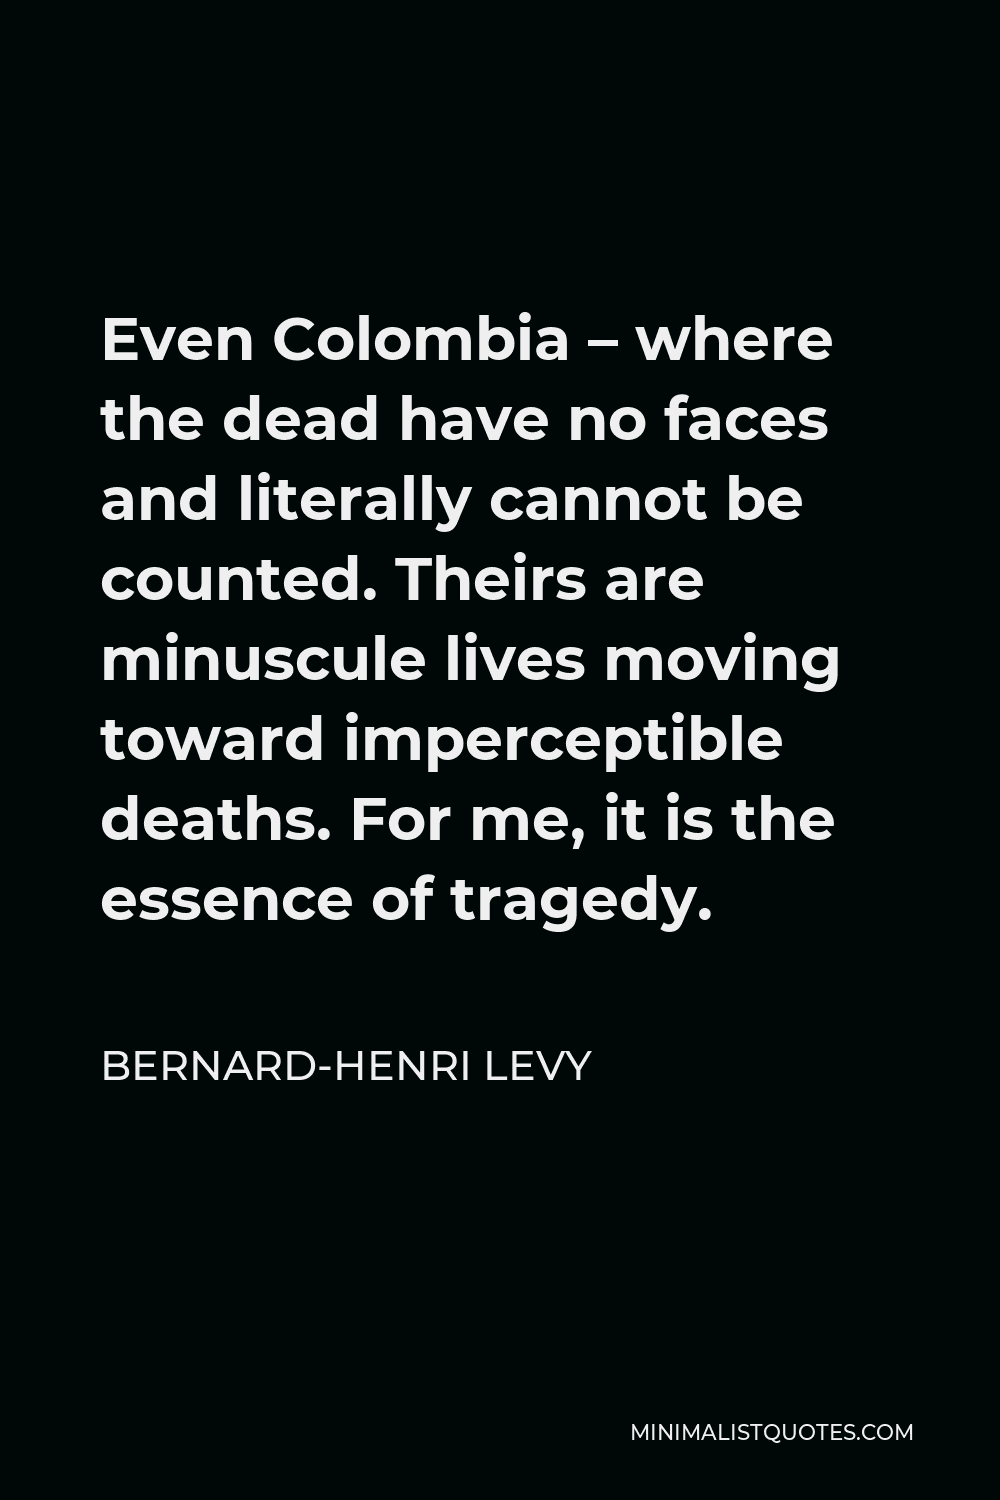 Bernard-Henri Levy Quote - Even Colombia – where the dead have no faces and literally cannot be counted. Theirs are minuscule lives moving toward imperceptible deaths. For me, it is the essence of tragedy.